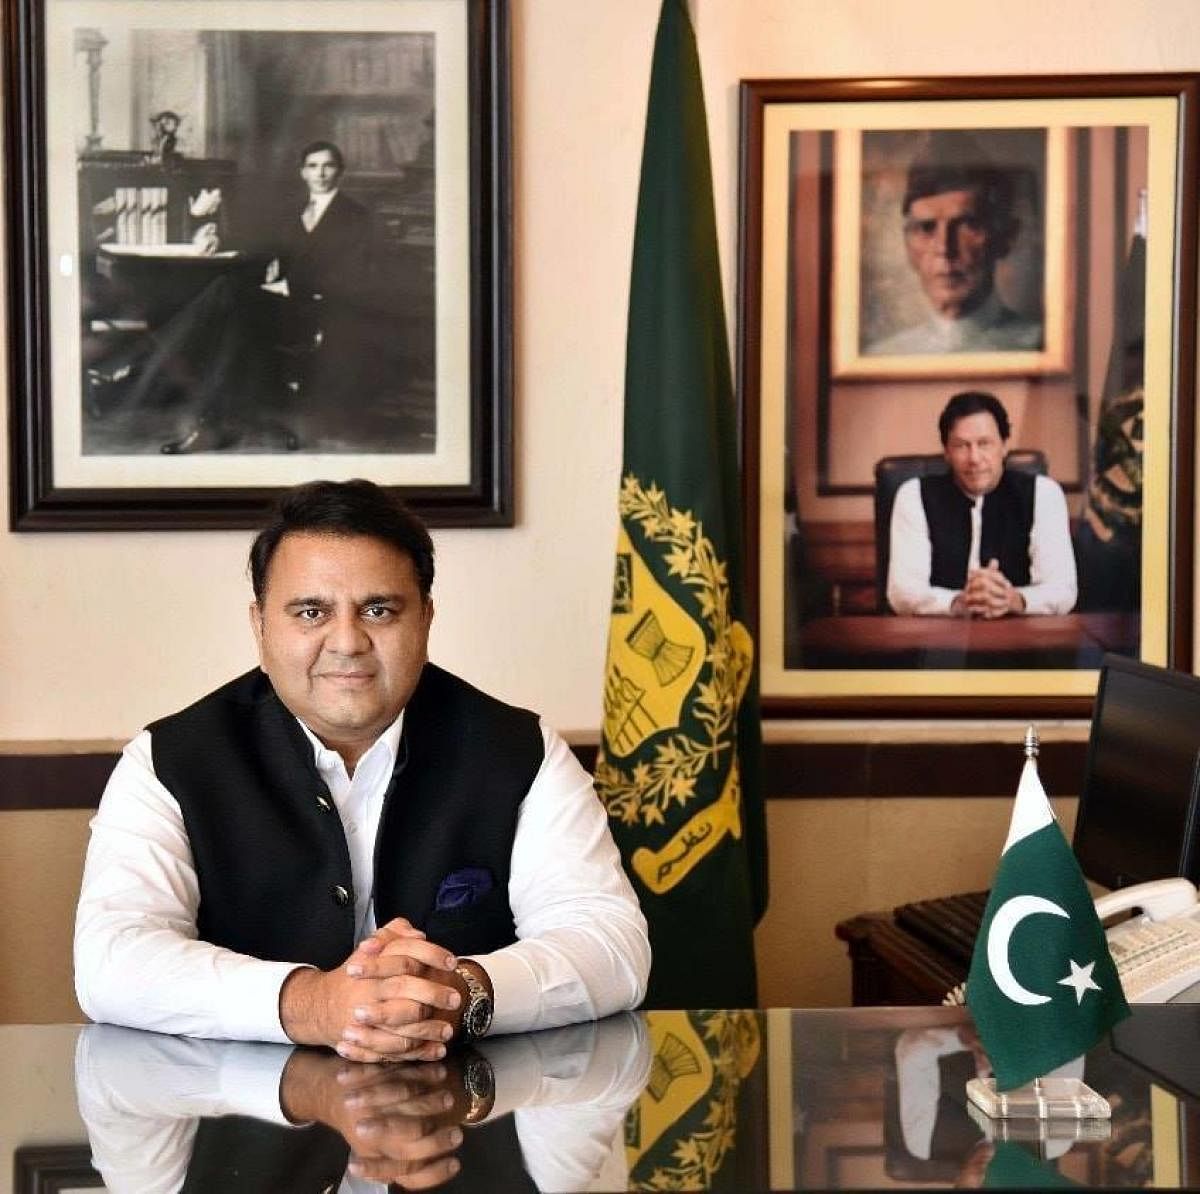 The selection process for the astronaut would start in 2020, Federal Minister for Science and Technology Chaudhry Fawad Hussain said on Sunday.